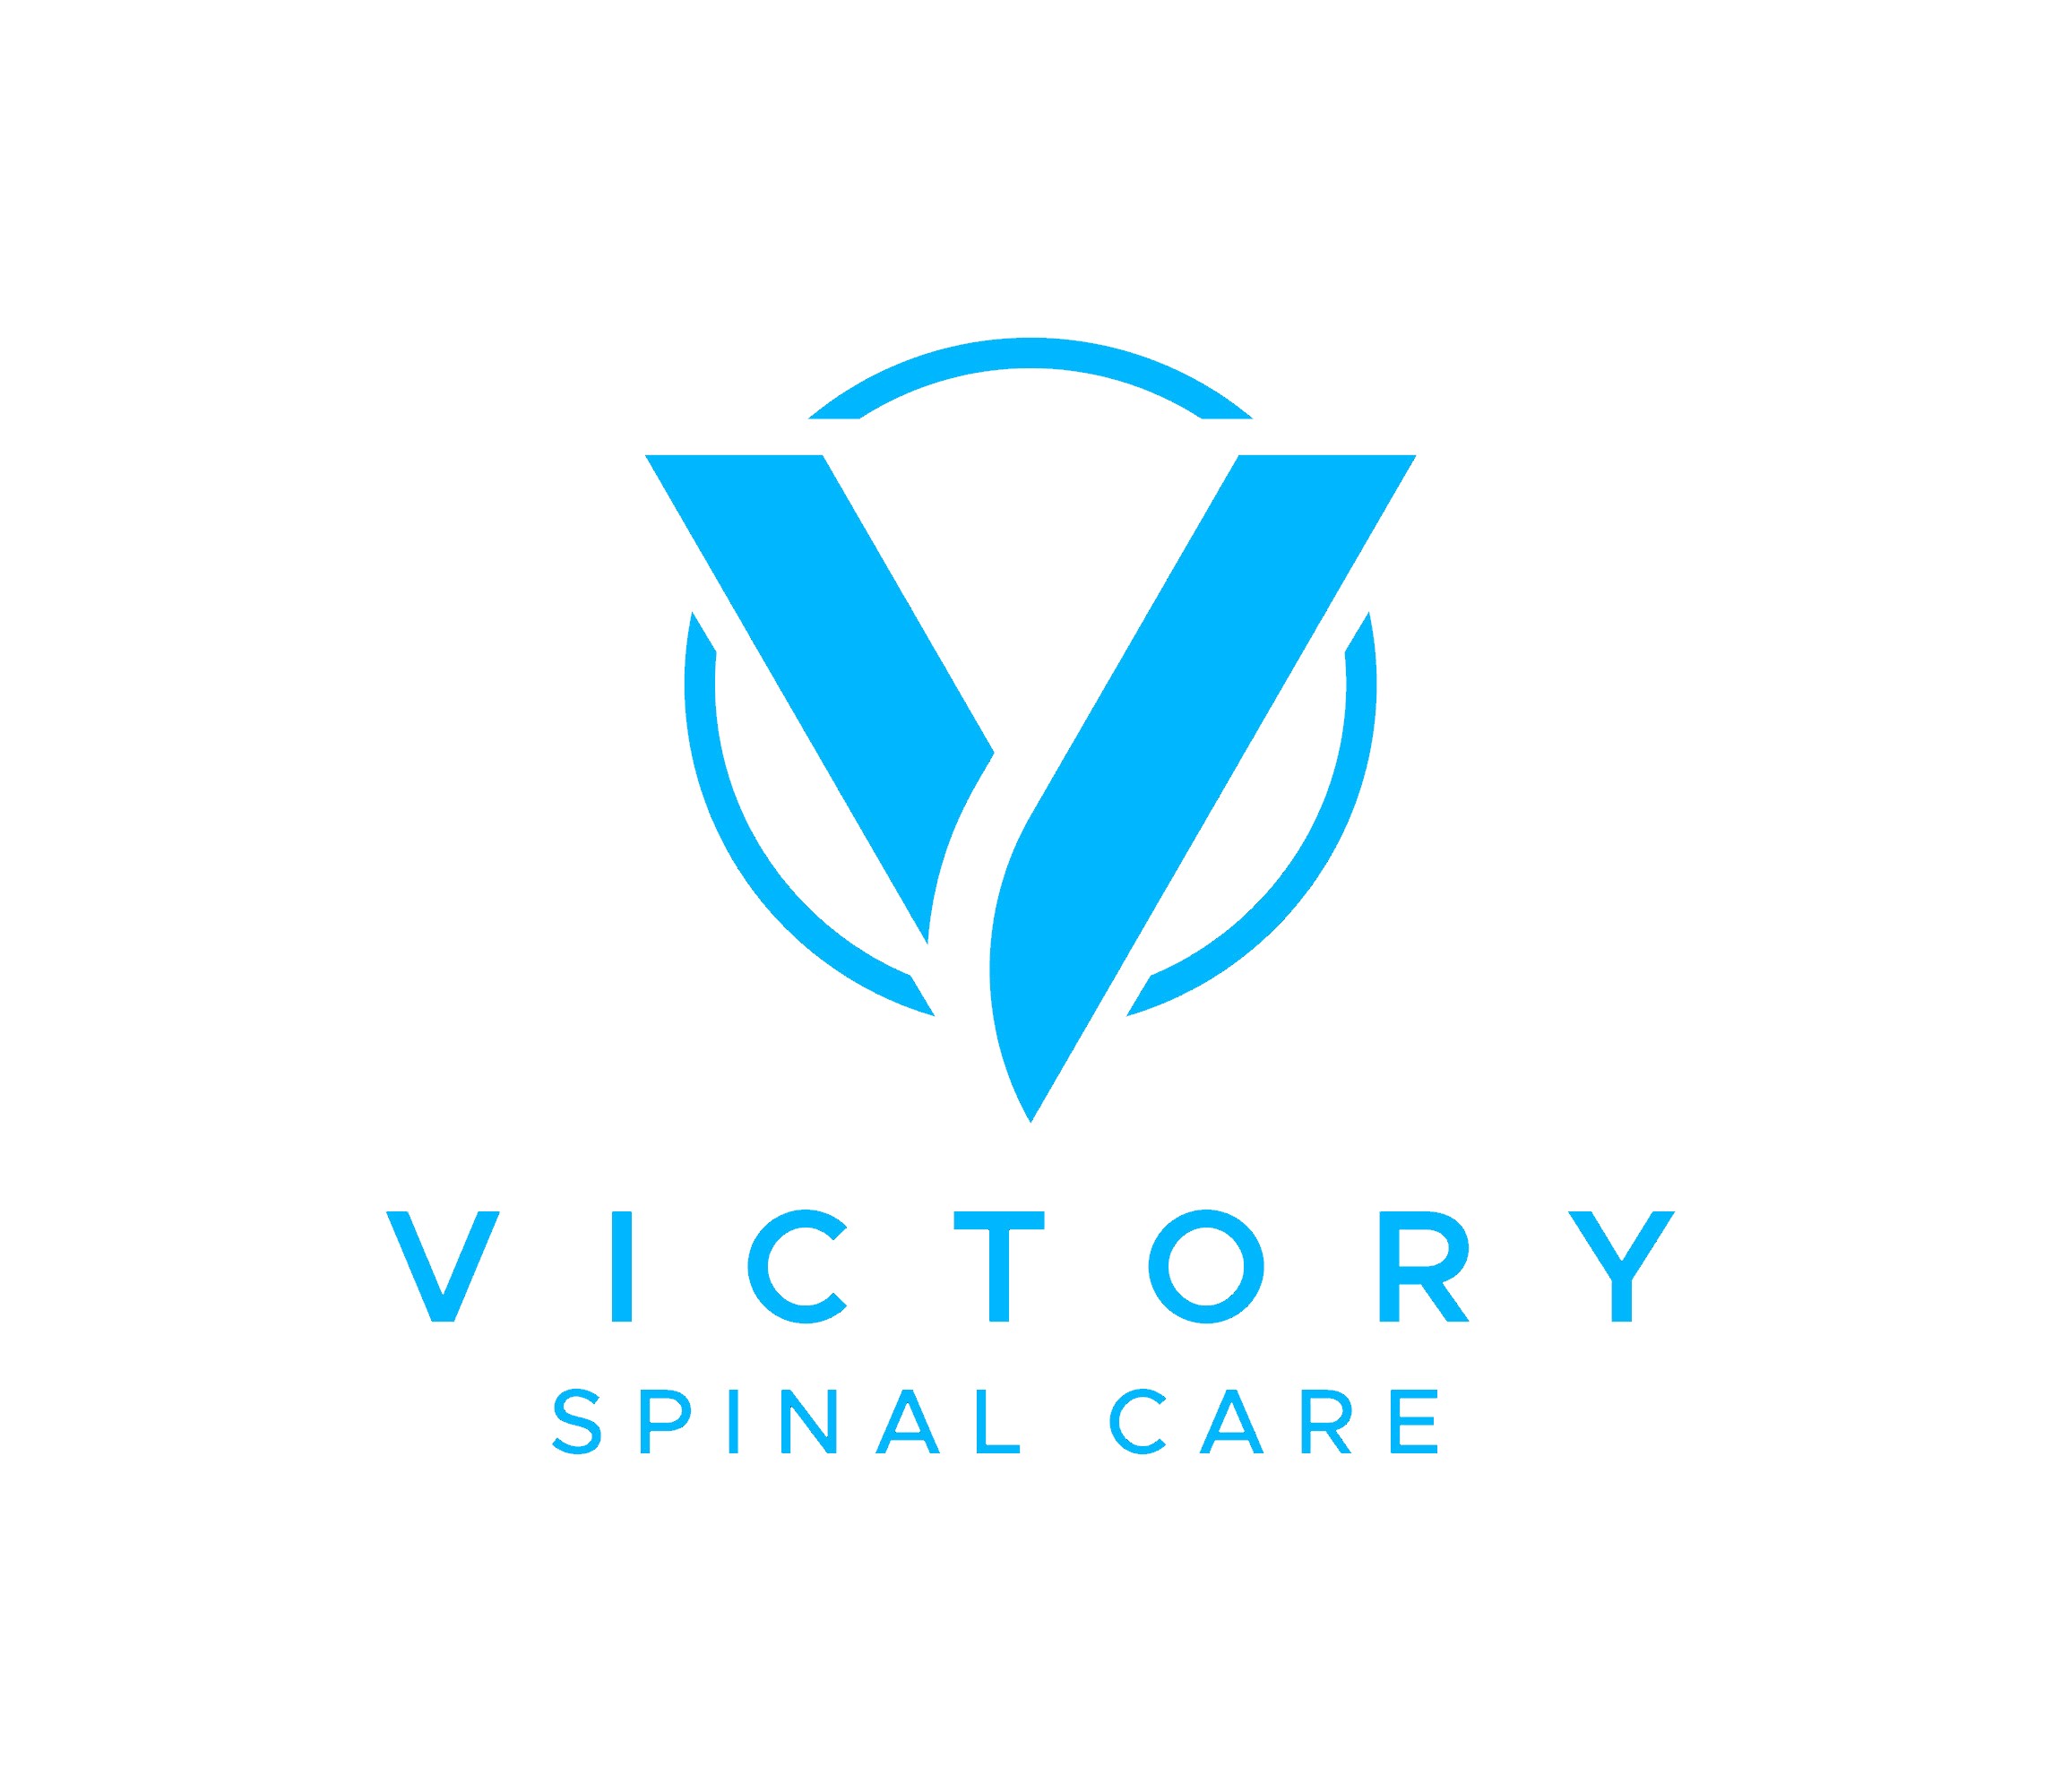 Victory Spinal Care Cape Logo